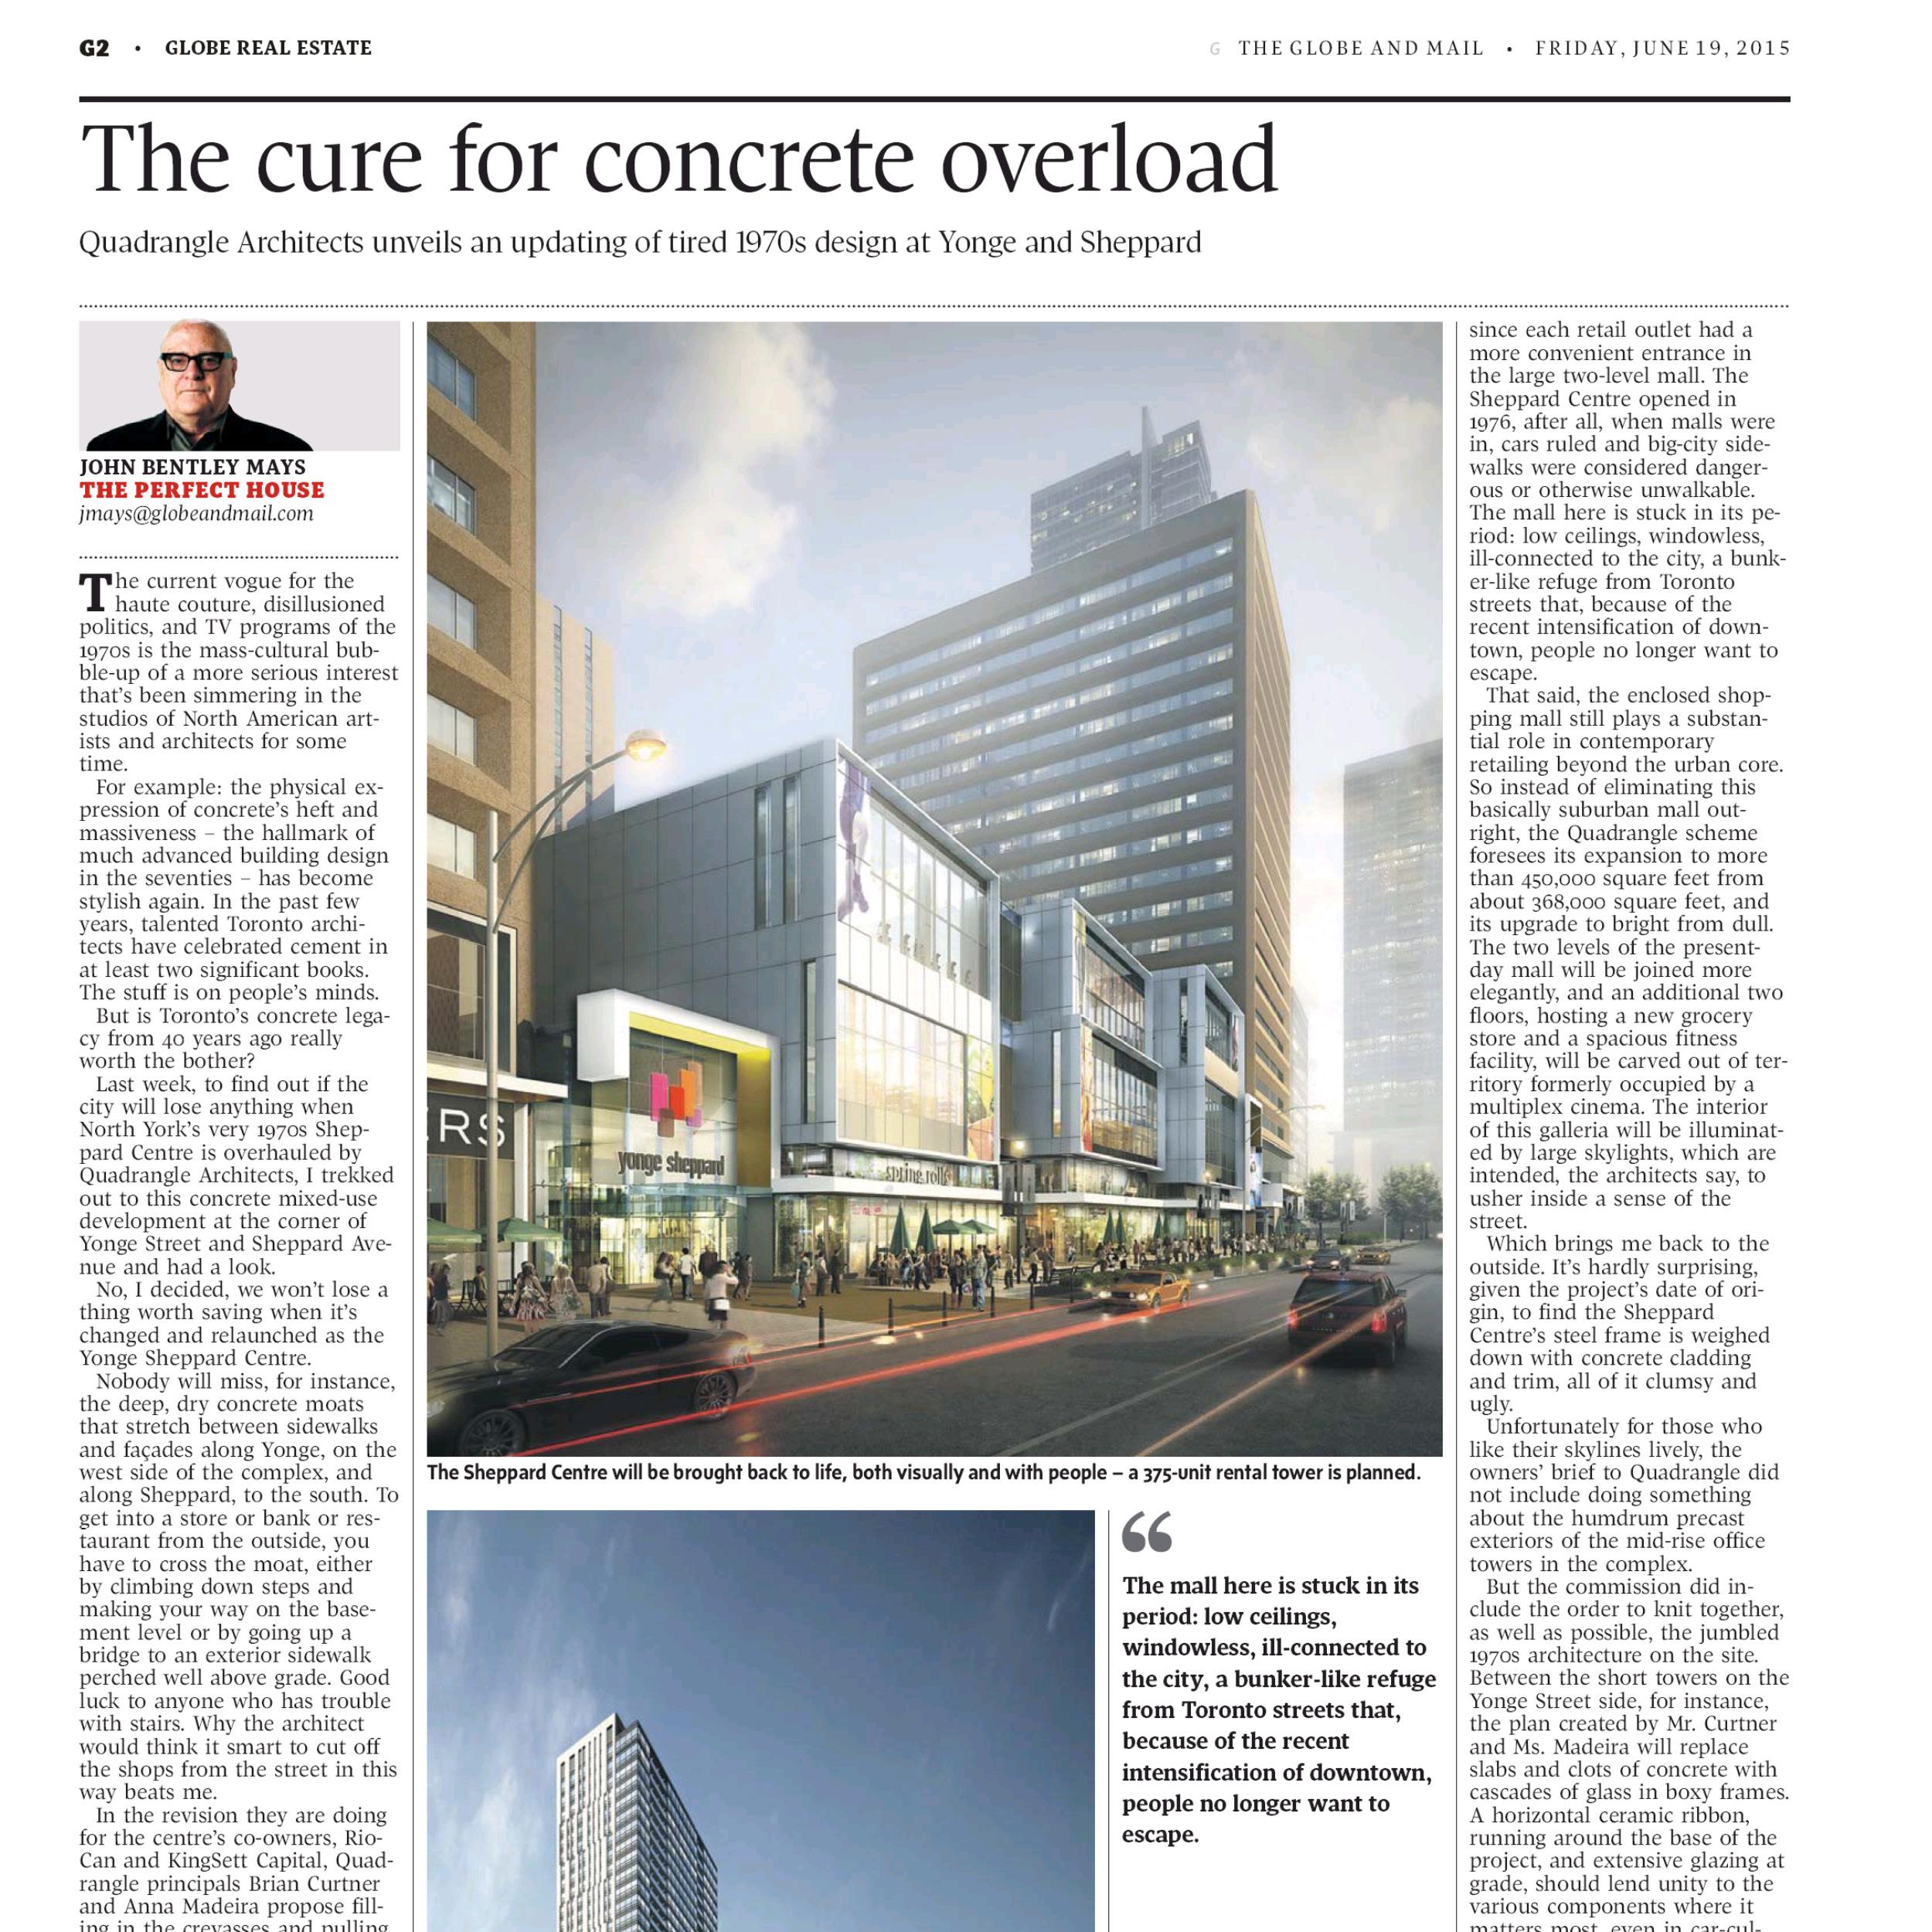 Globe and Mail newspaper article about Yonge Sheppard Centre